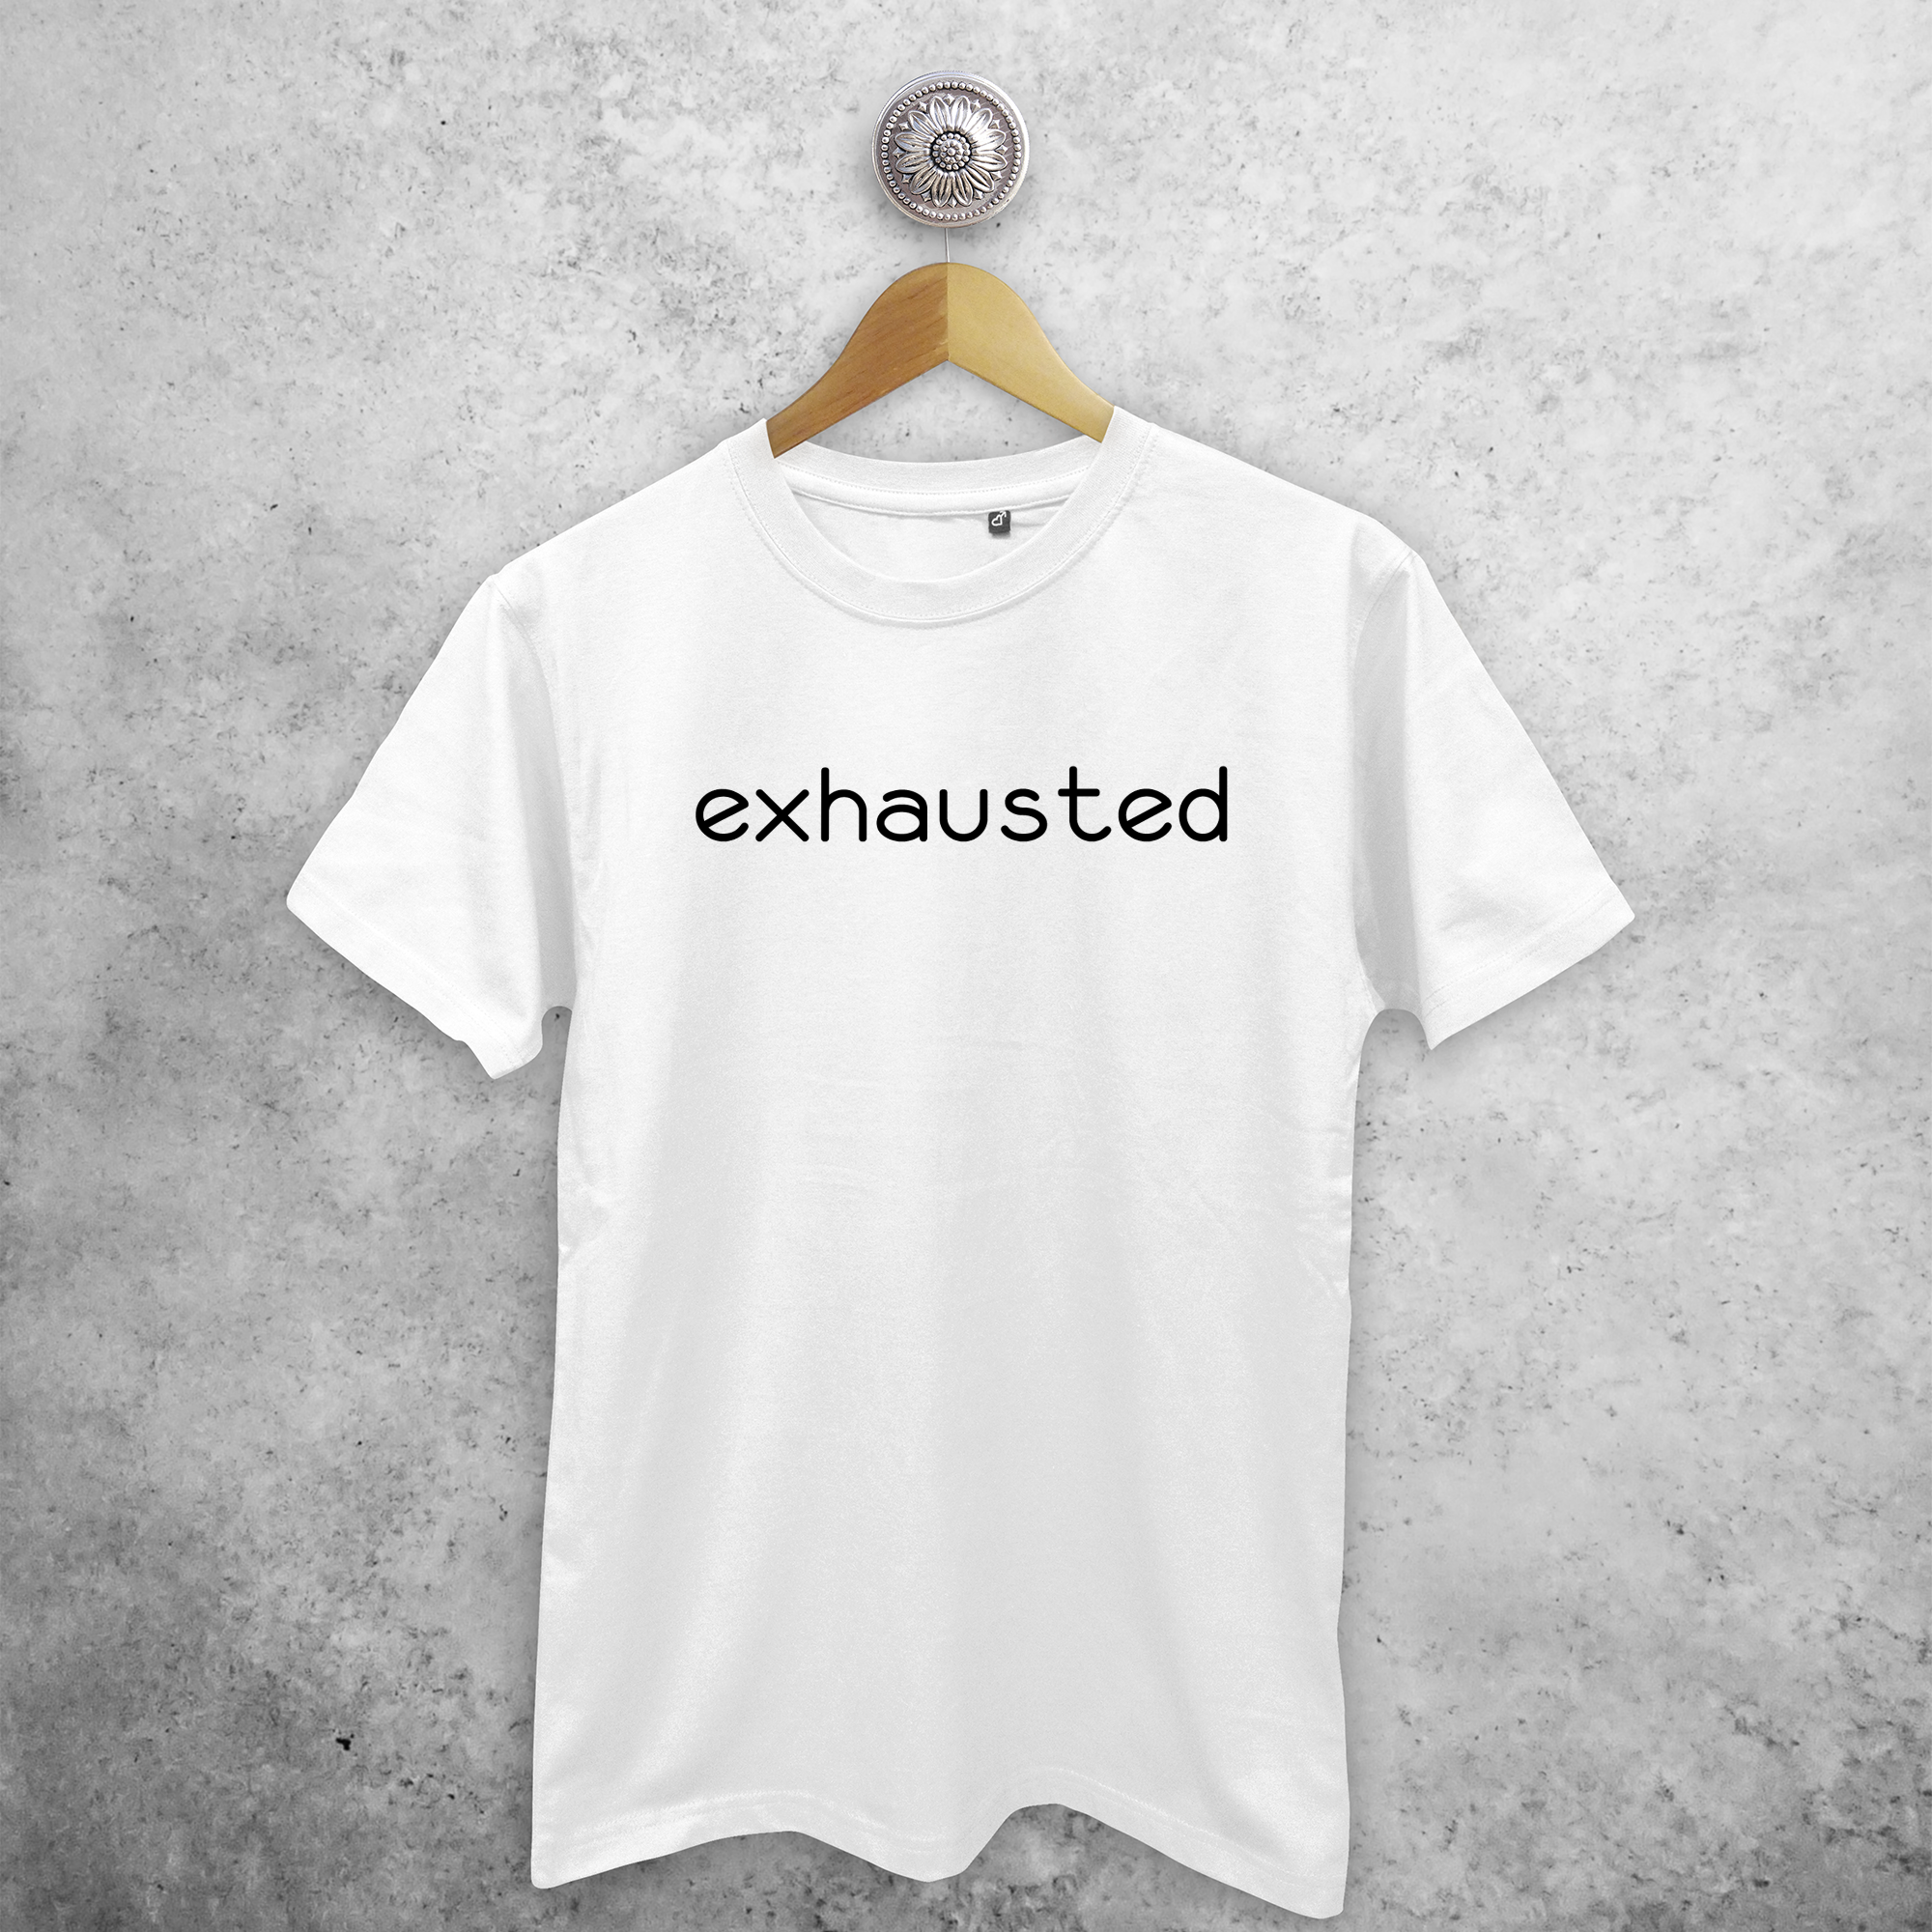 'Exhausted' adult shirt